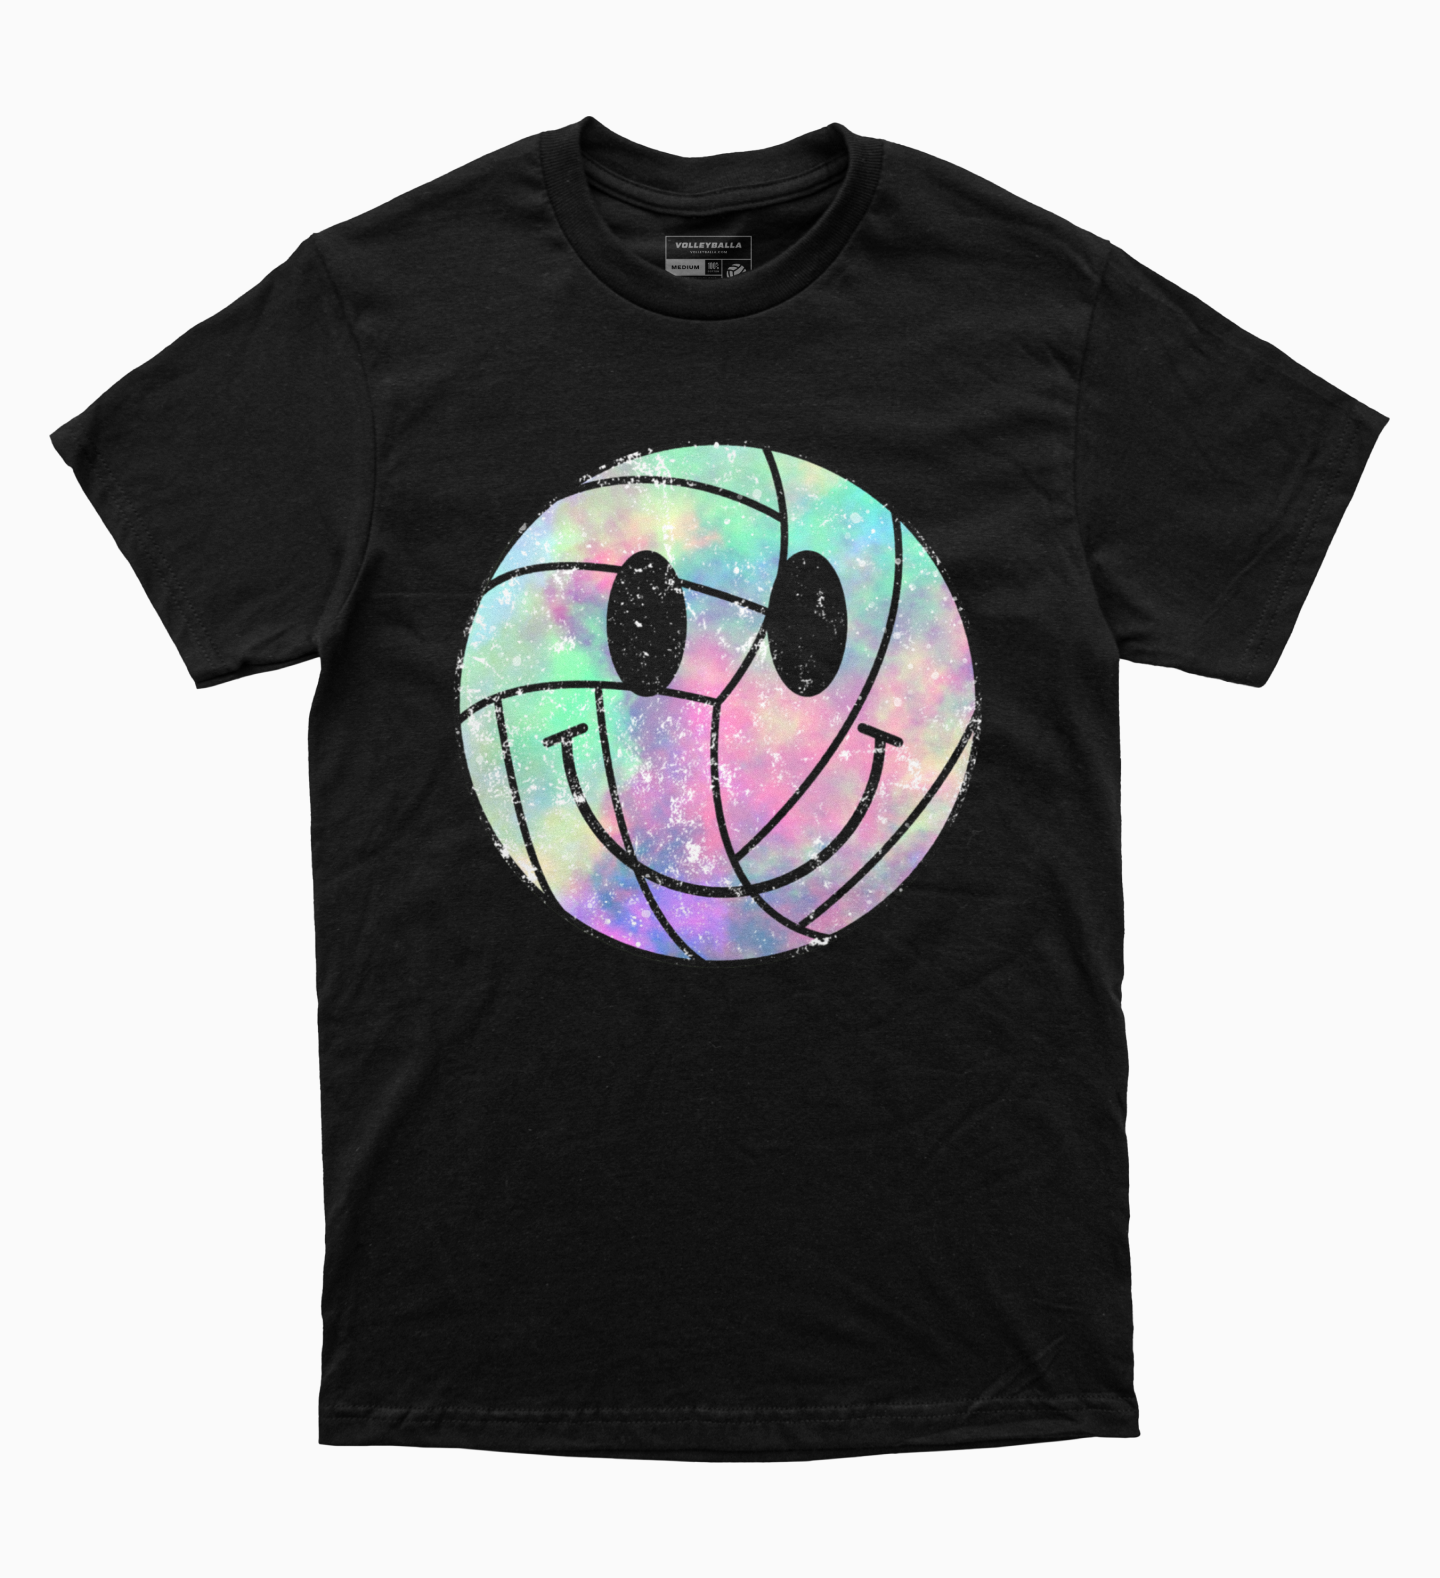 Volleyball Smiley Face Galaxy T-Shirt